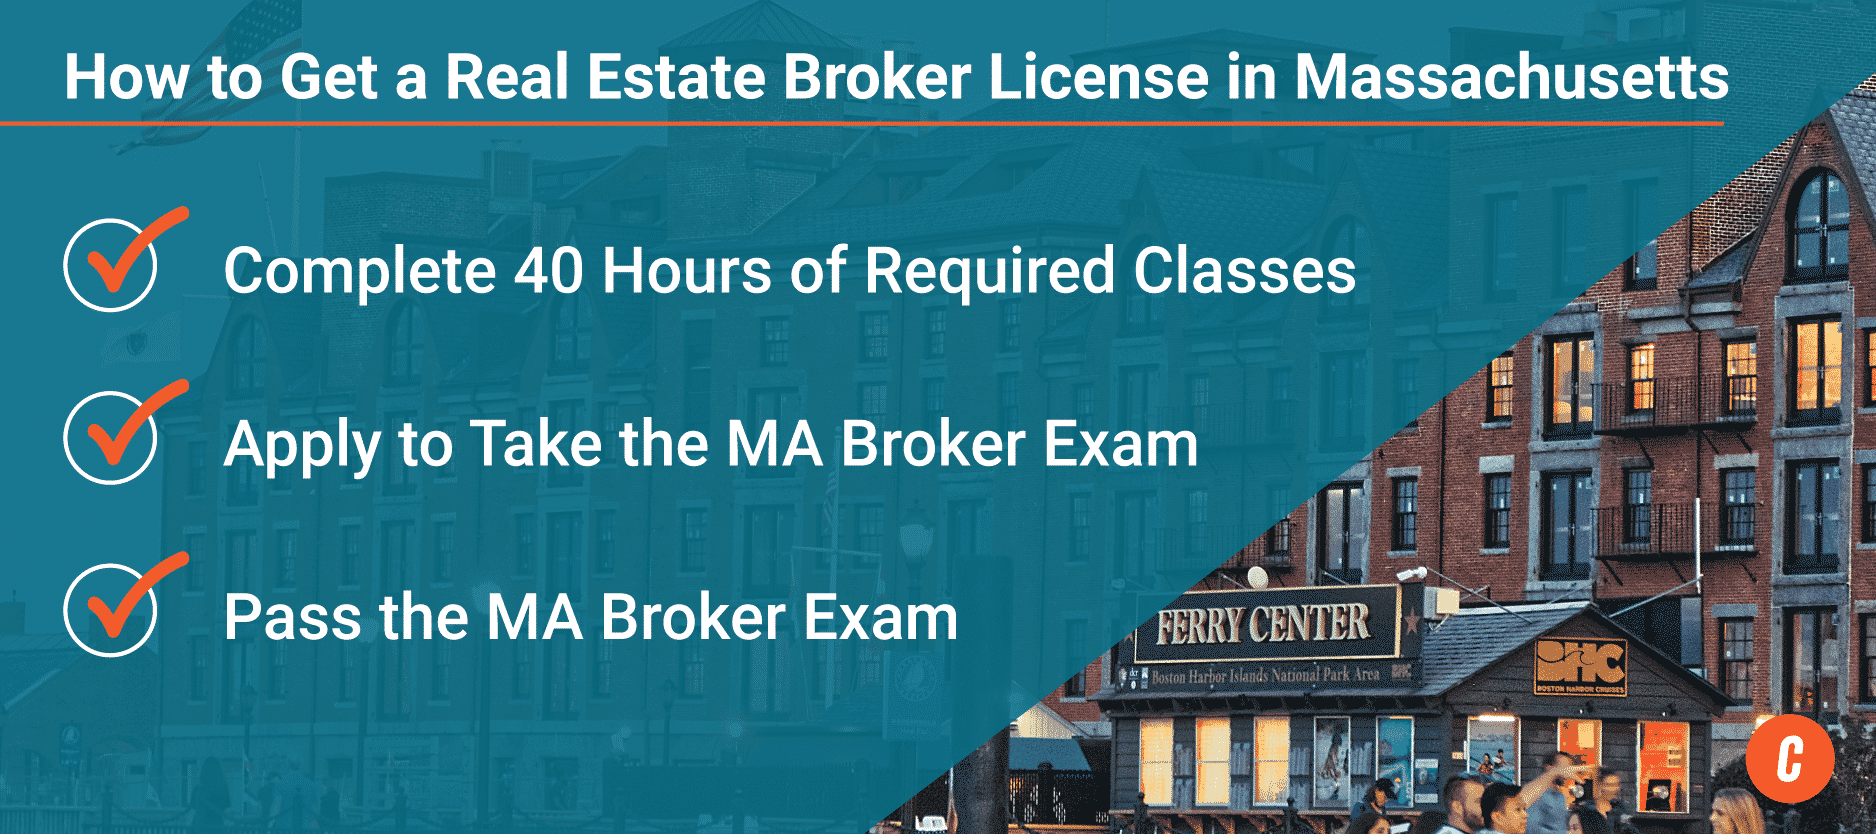 Infographic_How to Get a Real Estate Broker License_Massachusetts